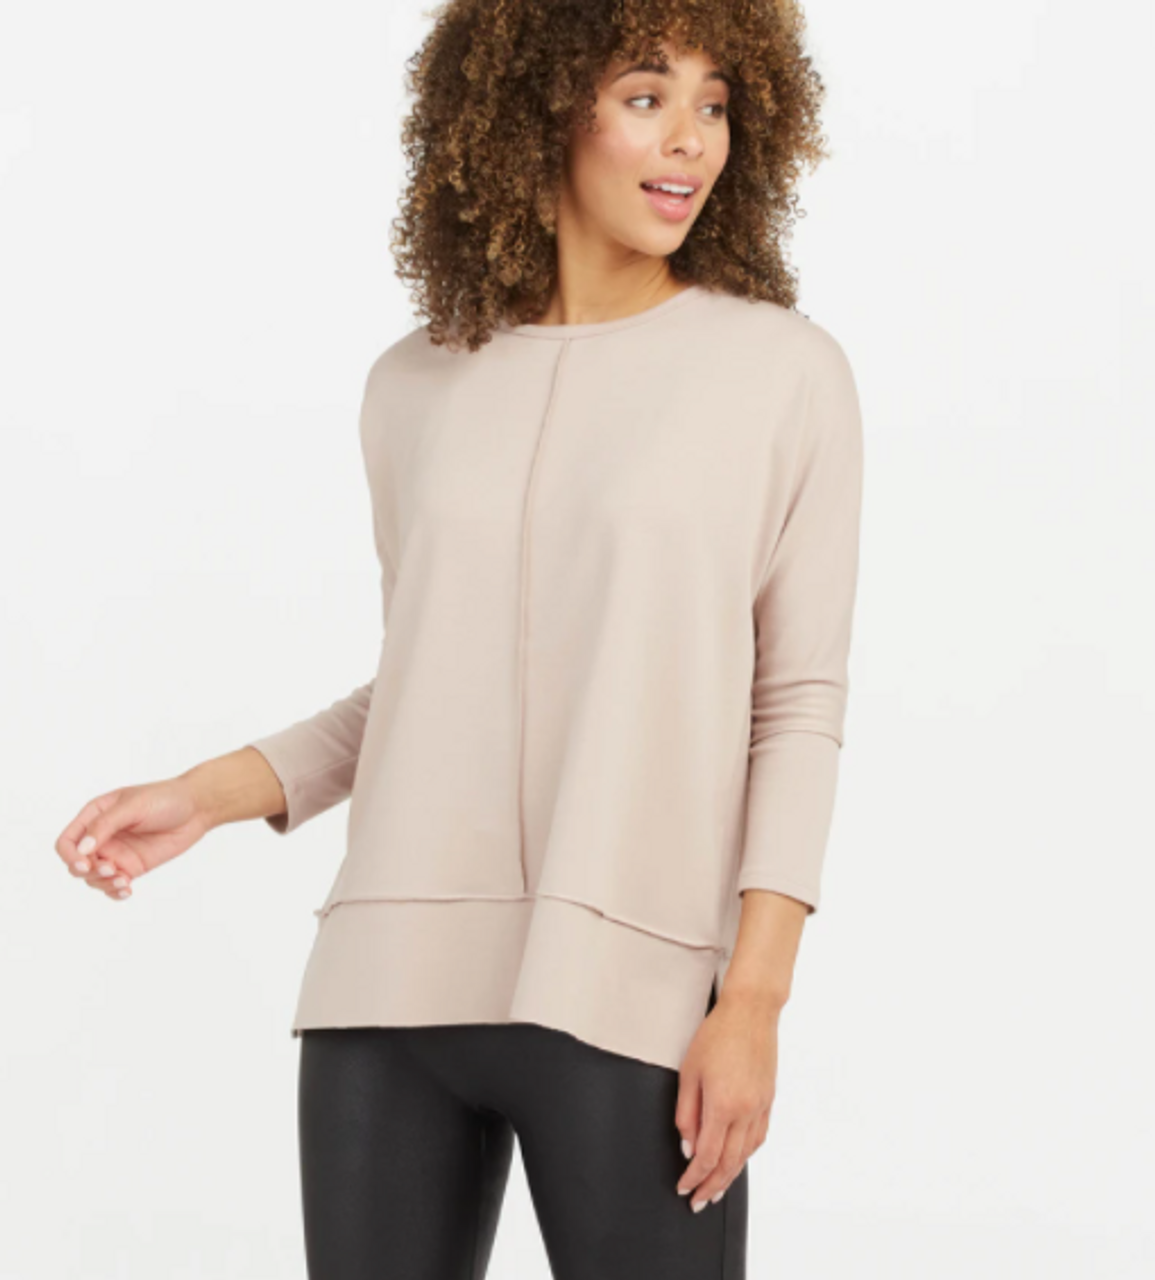 SPANX PERFECT LENGTH TOP DOLMAN SLEEVE - Steve's on the Square